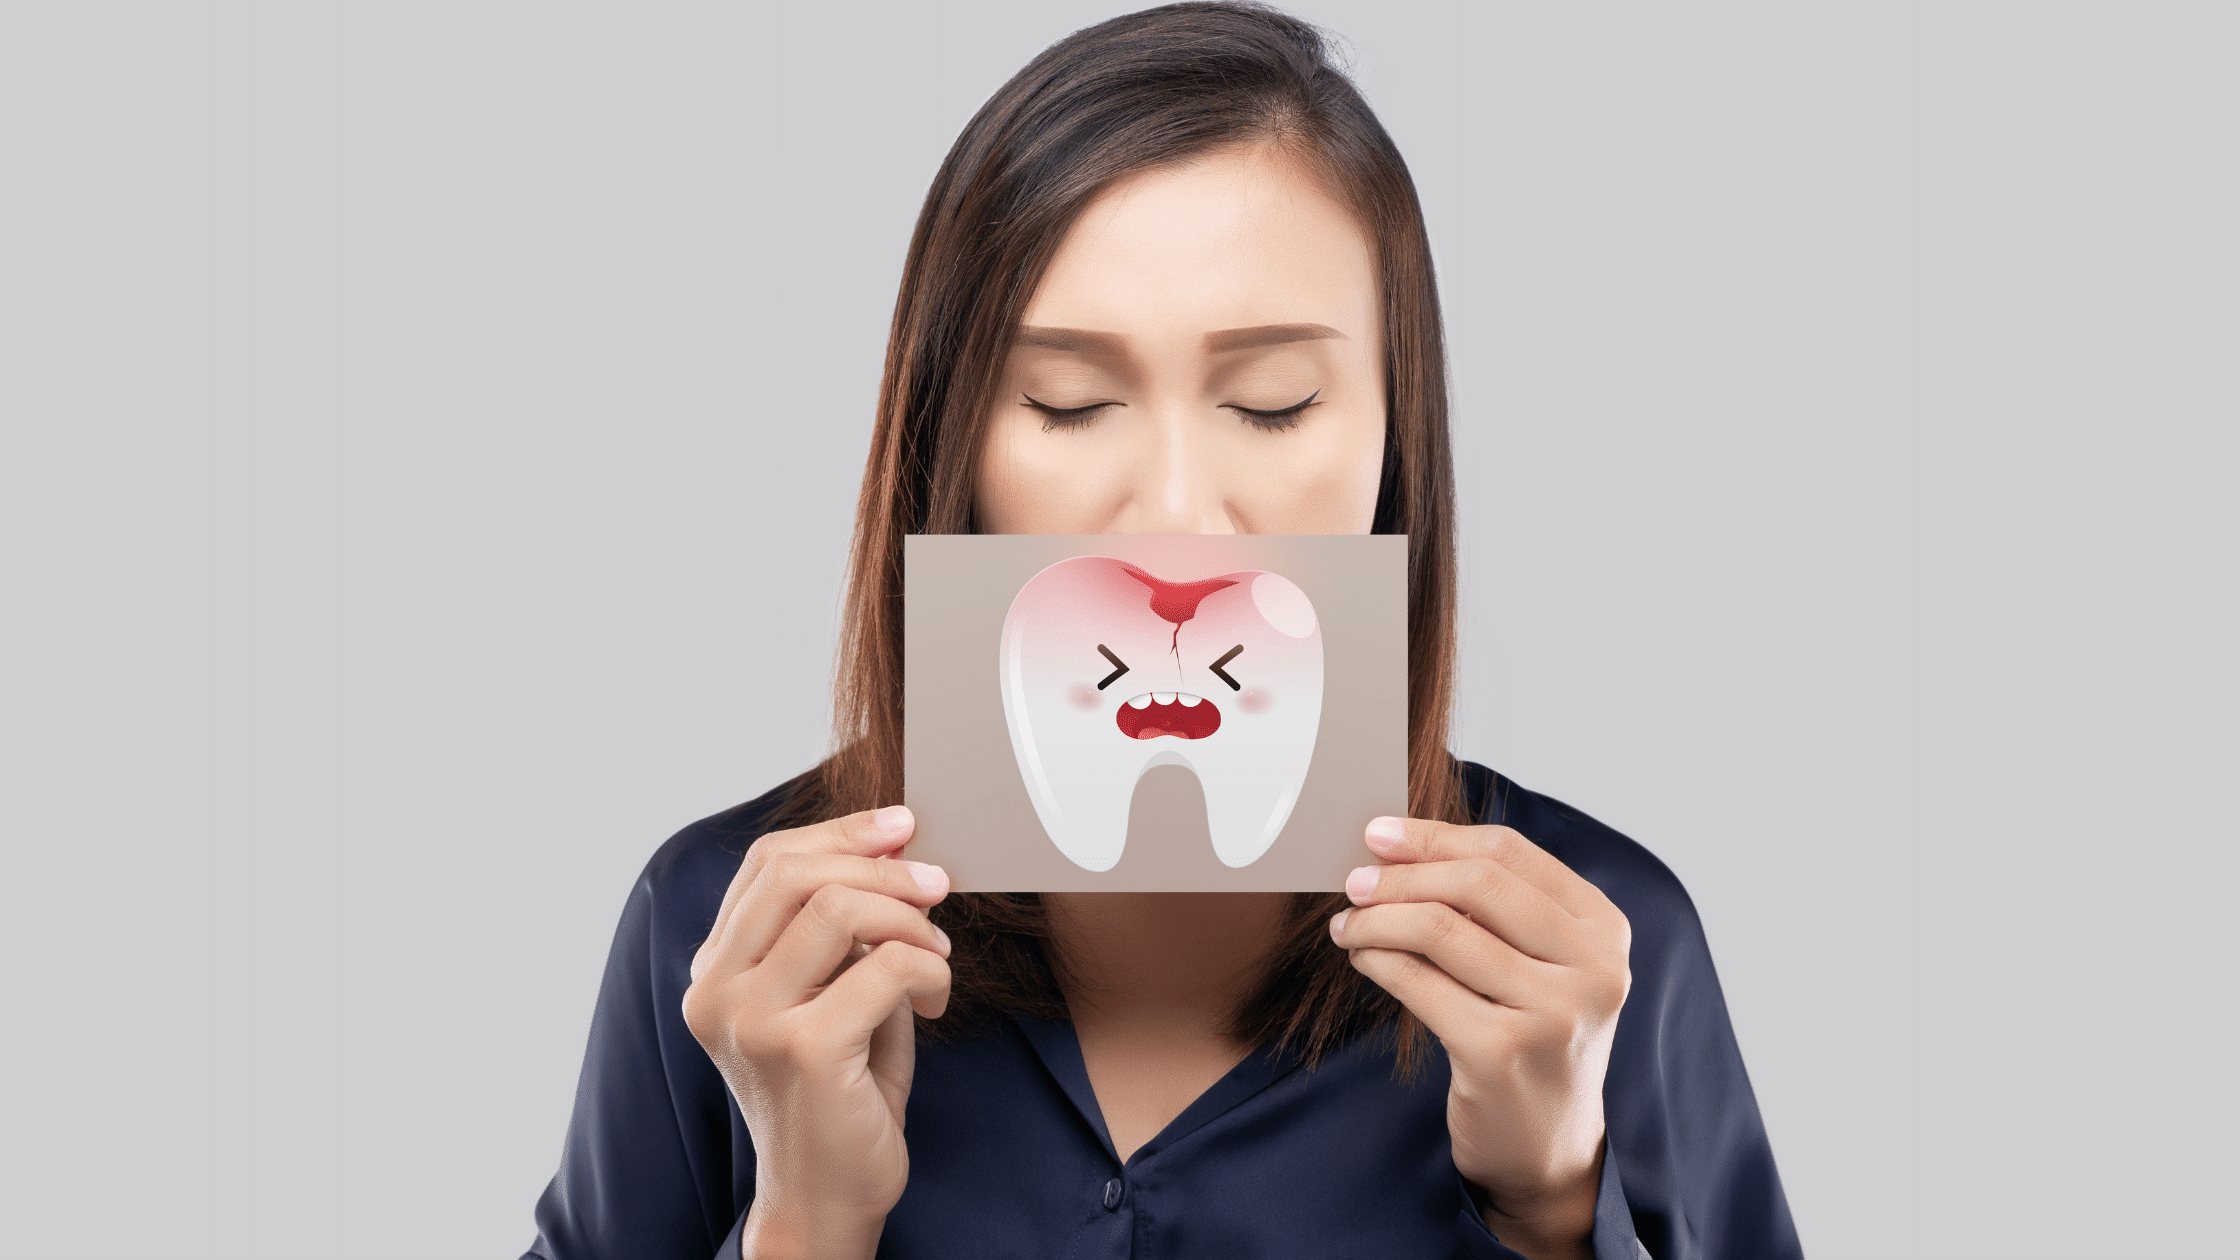 Why No Dairy After Tooth Extraction